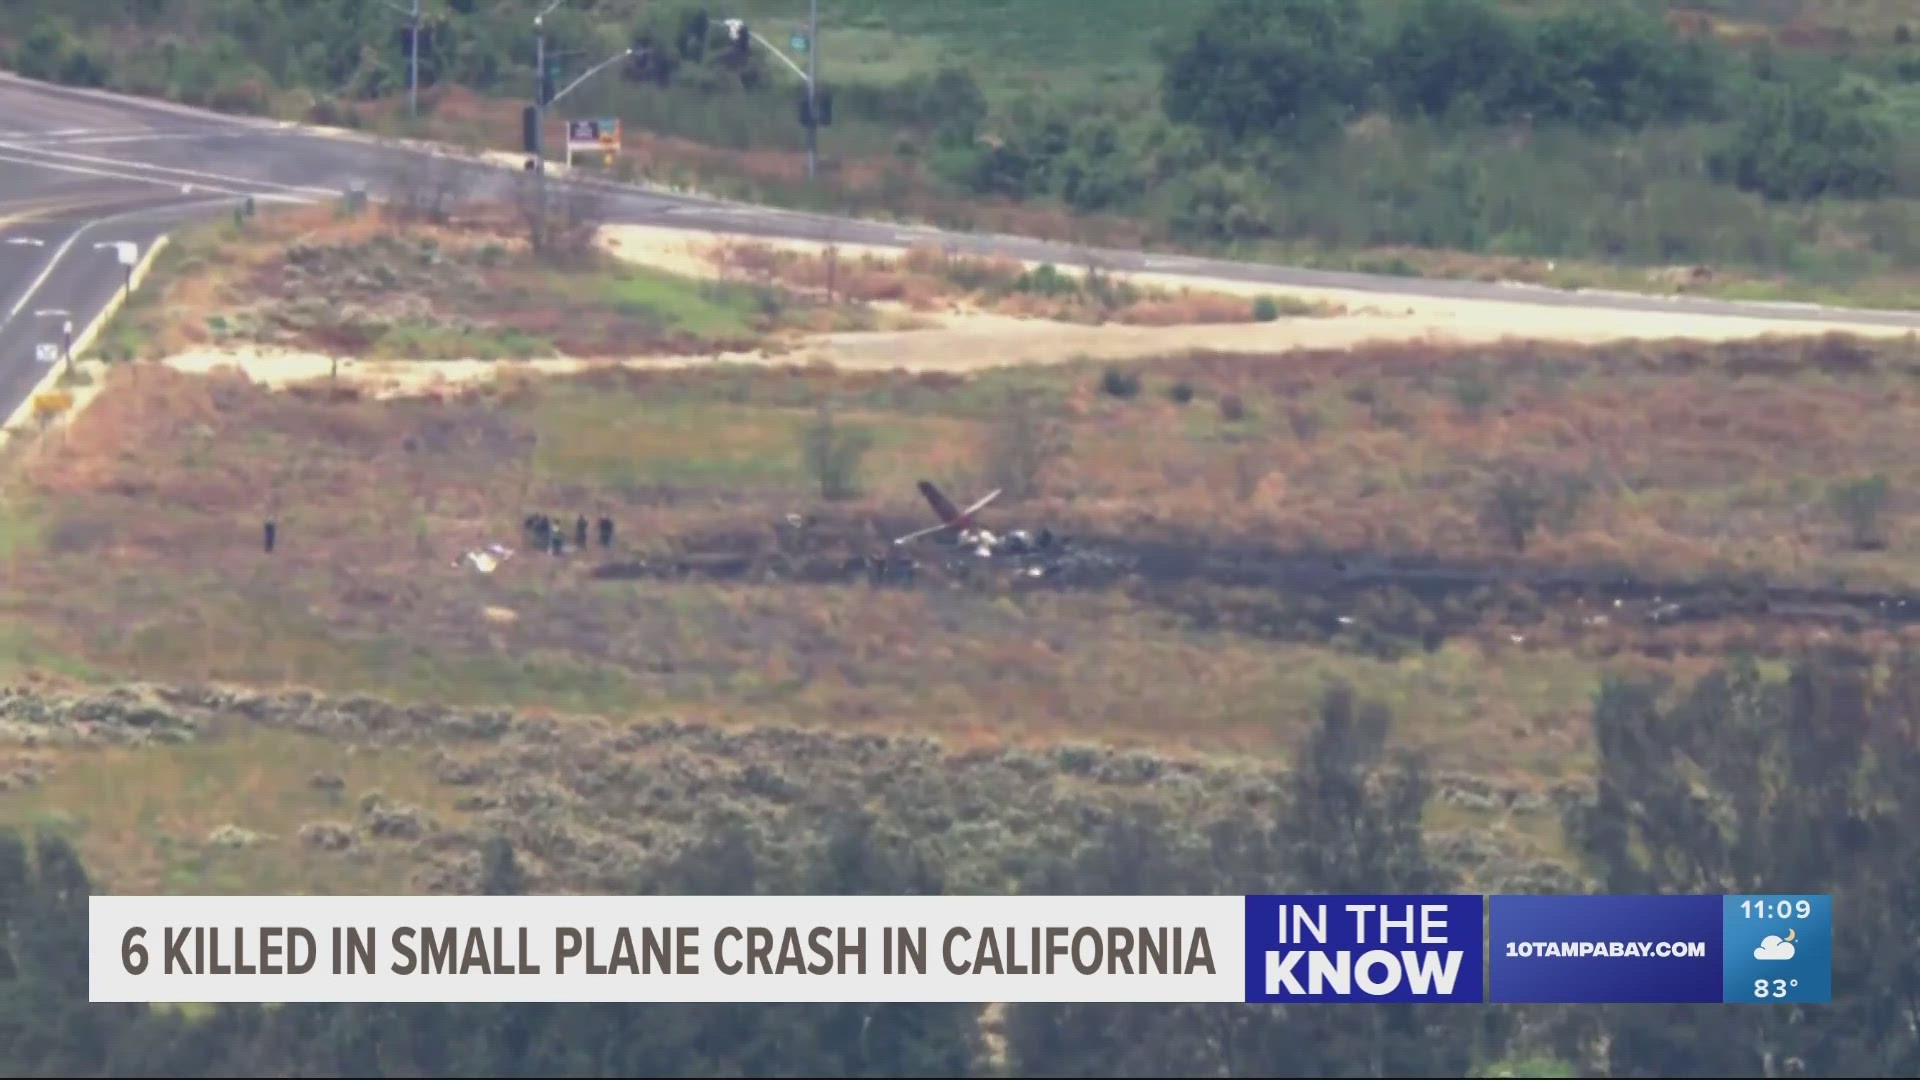 The National Transportation Safety Board and the FAA are both investigating.